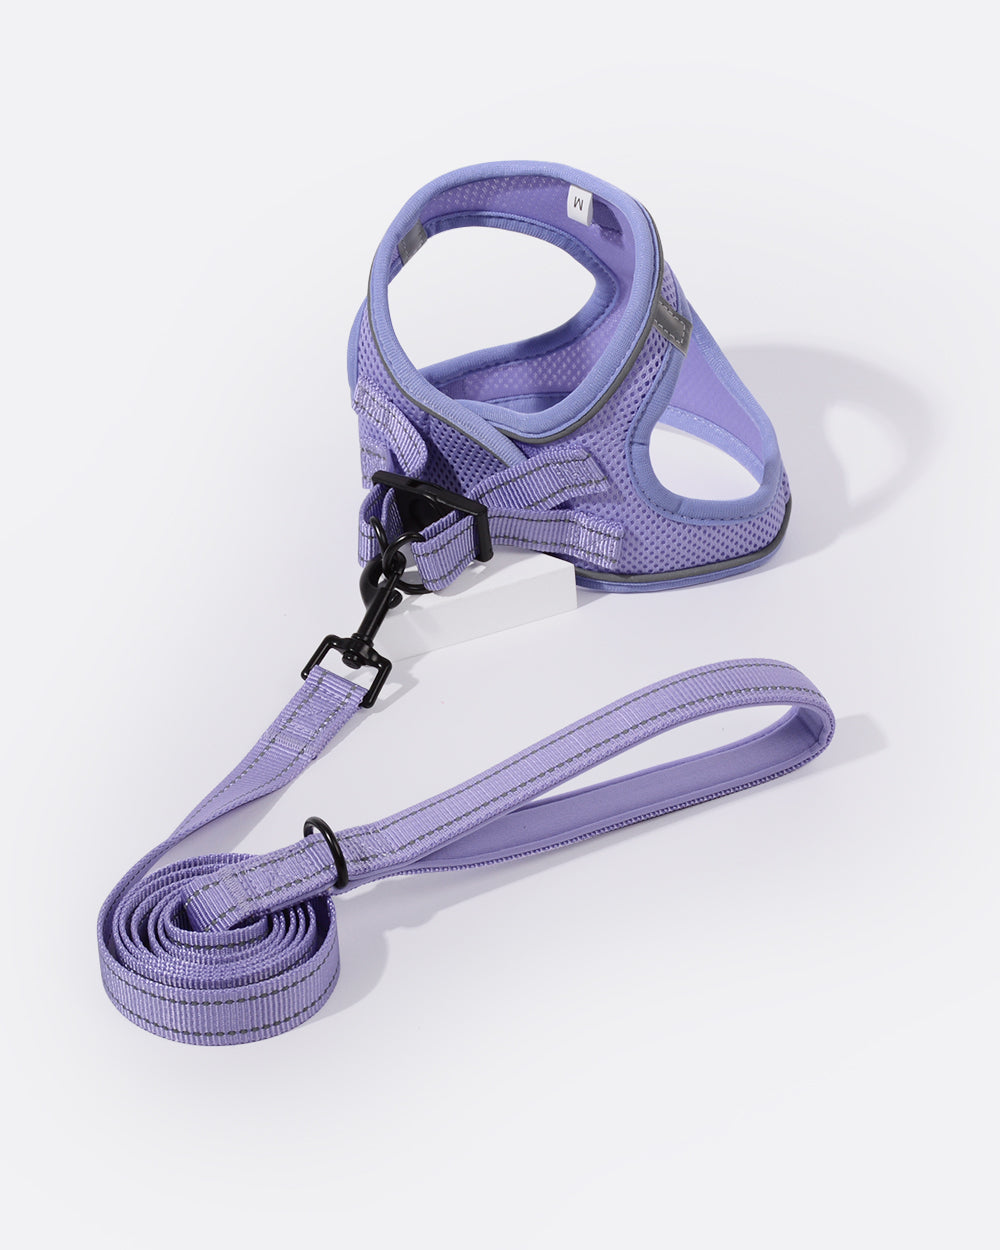 OxyMesh Velcro Step-in Harness and Leash Set - Lavender